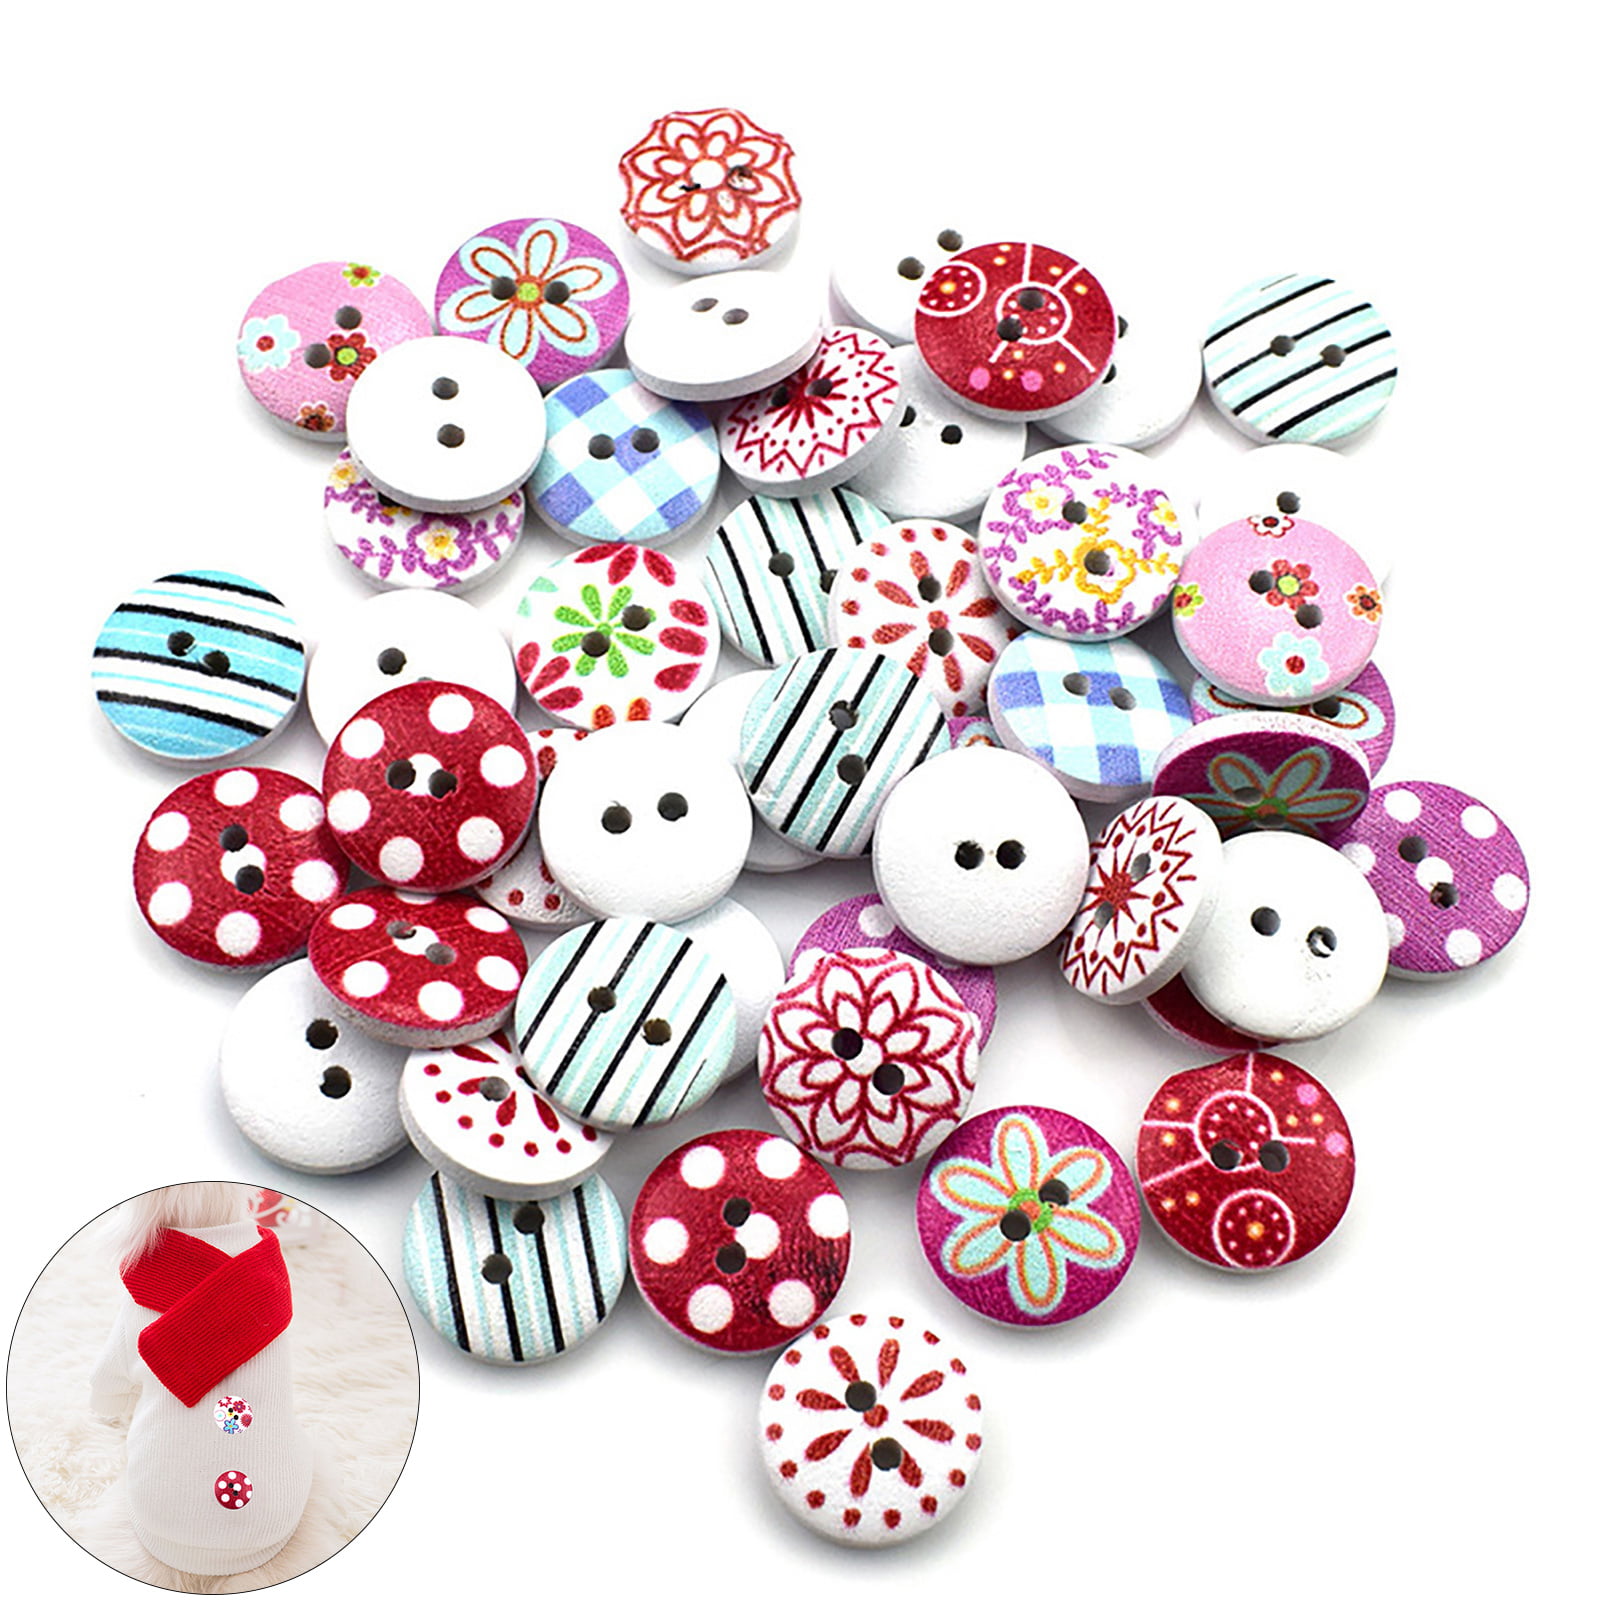 100pcs 1.5cm 2-Hole Wooden Buttons with Christmas Colored Pattern